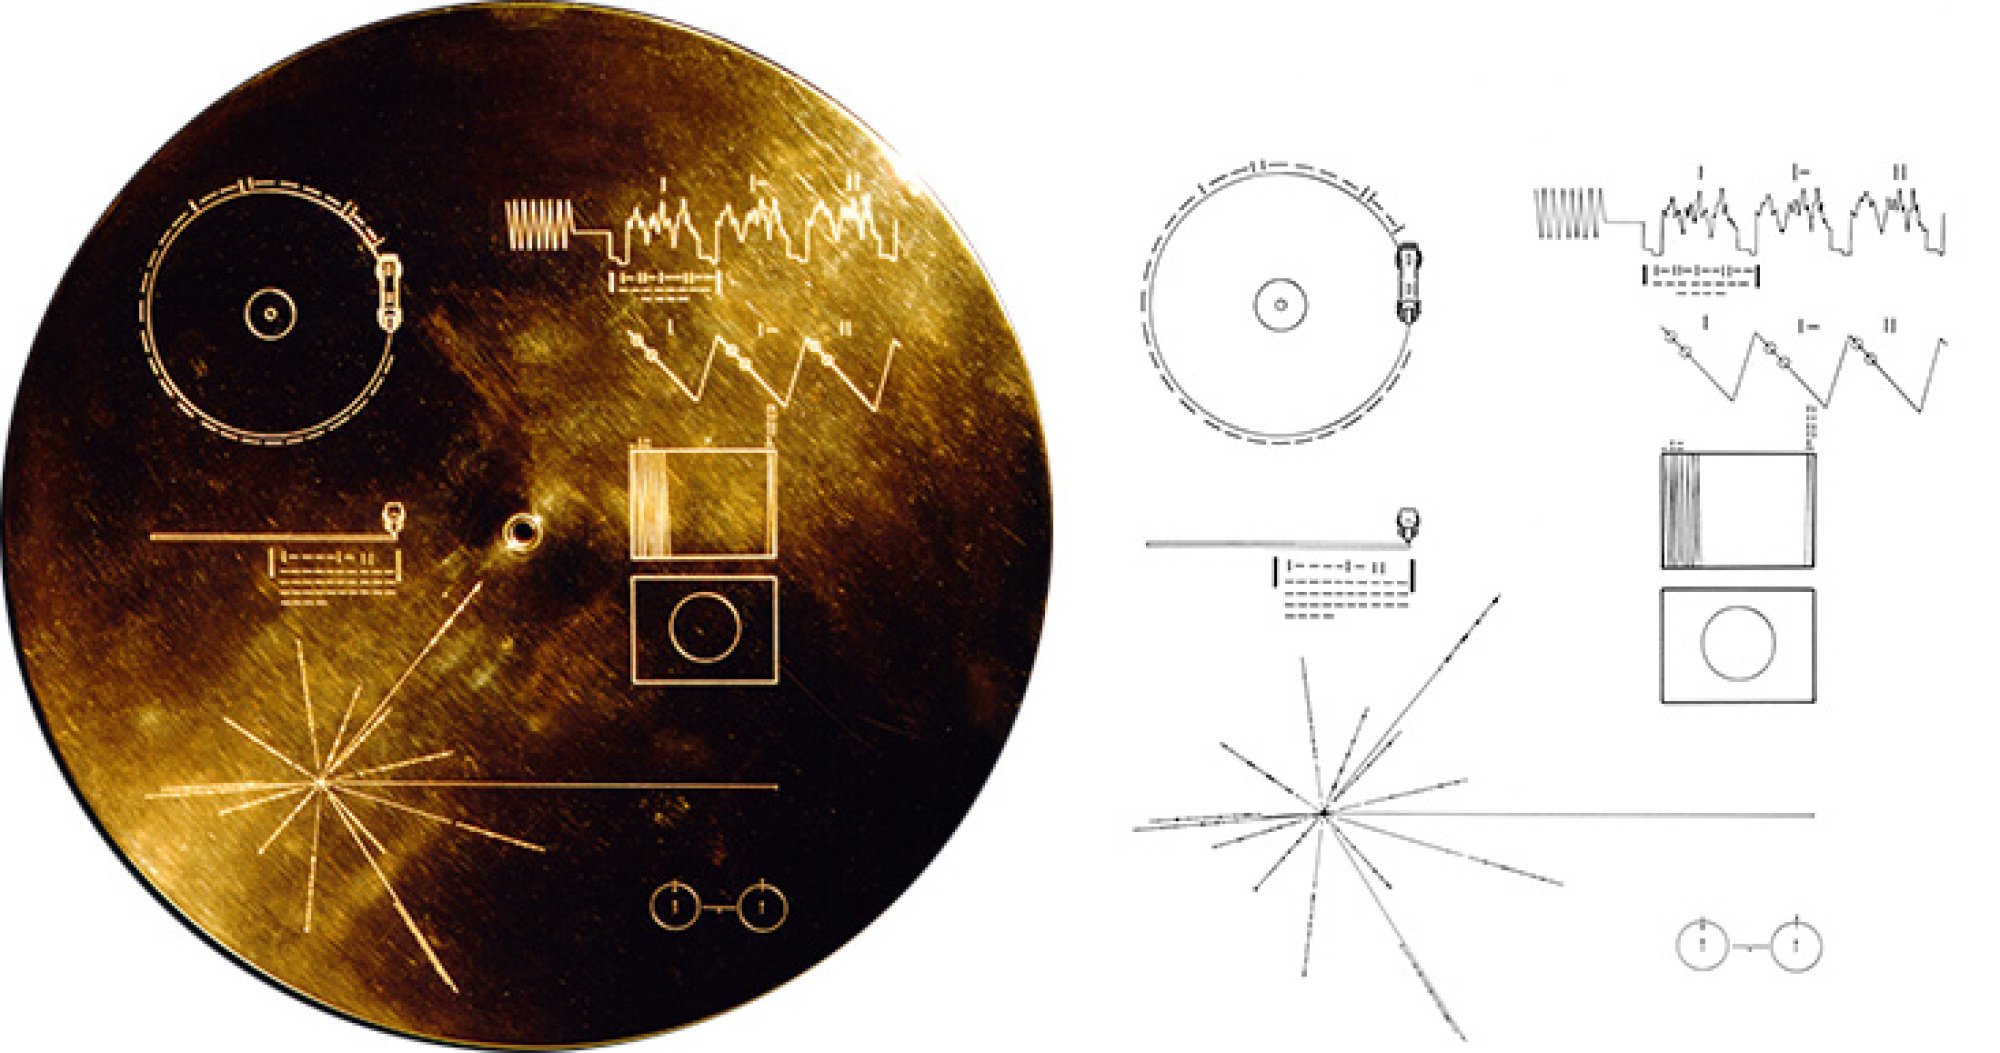 The Voyagers' golden record along with instructions.